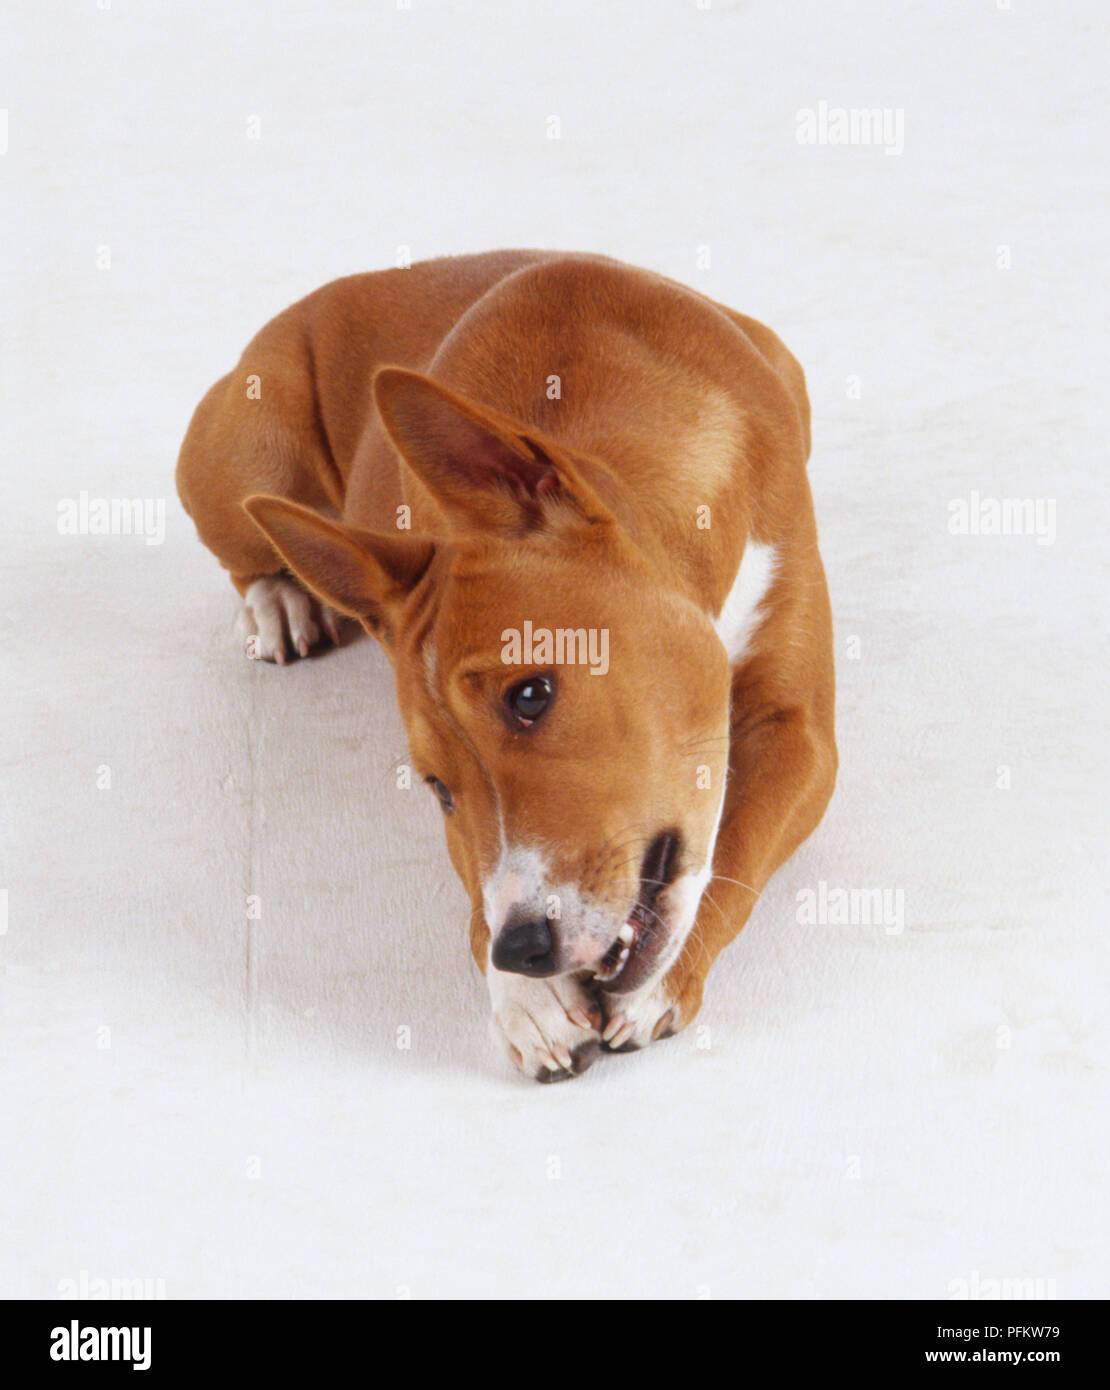 A reddish brown basenji dog with pricked up ears chews on a toy or bone while lying down. Stock Photo